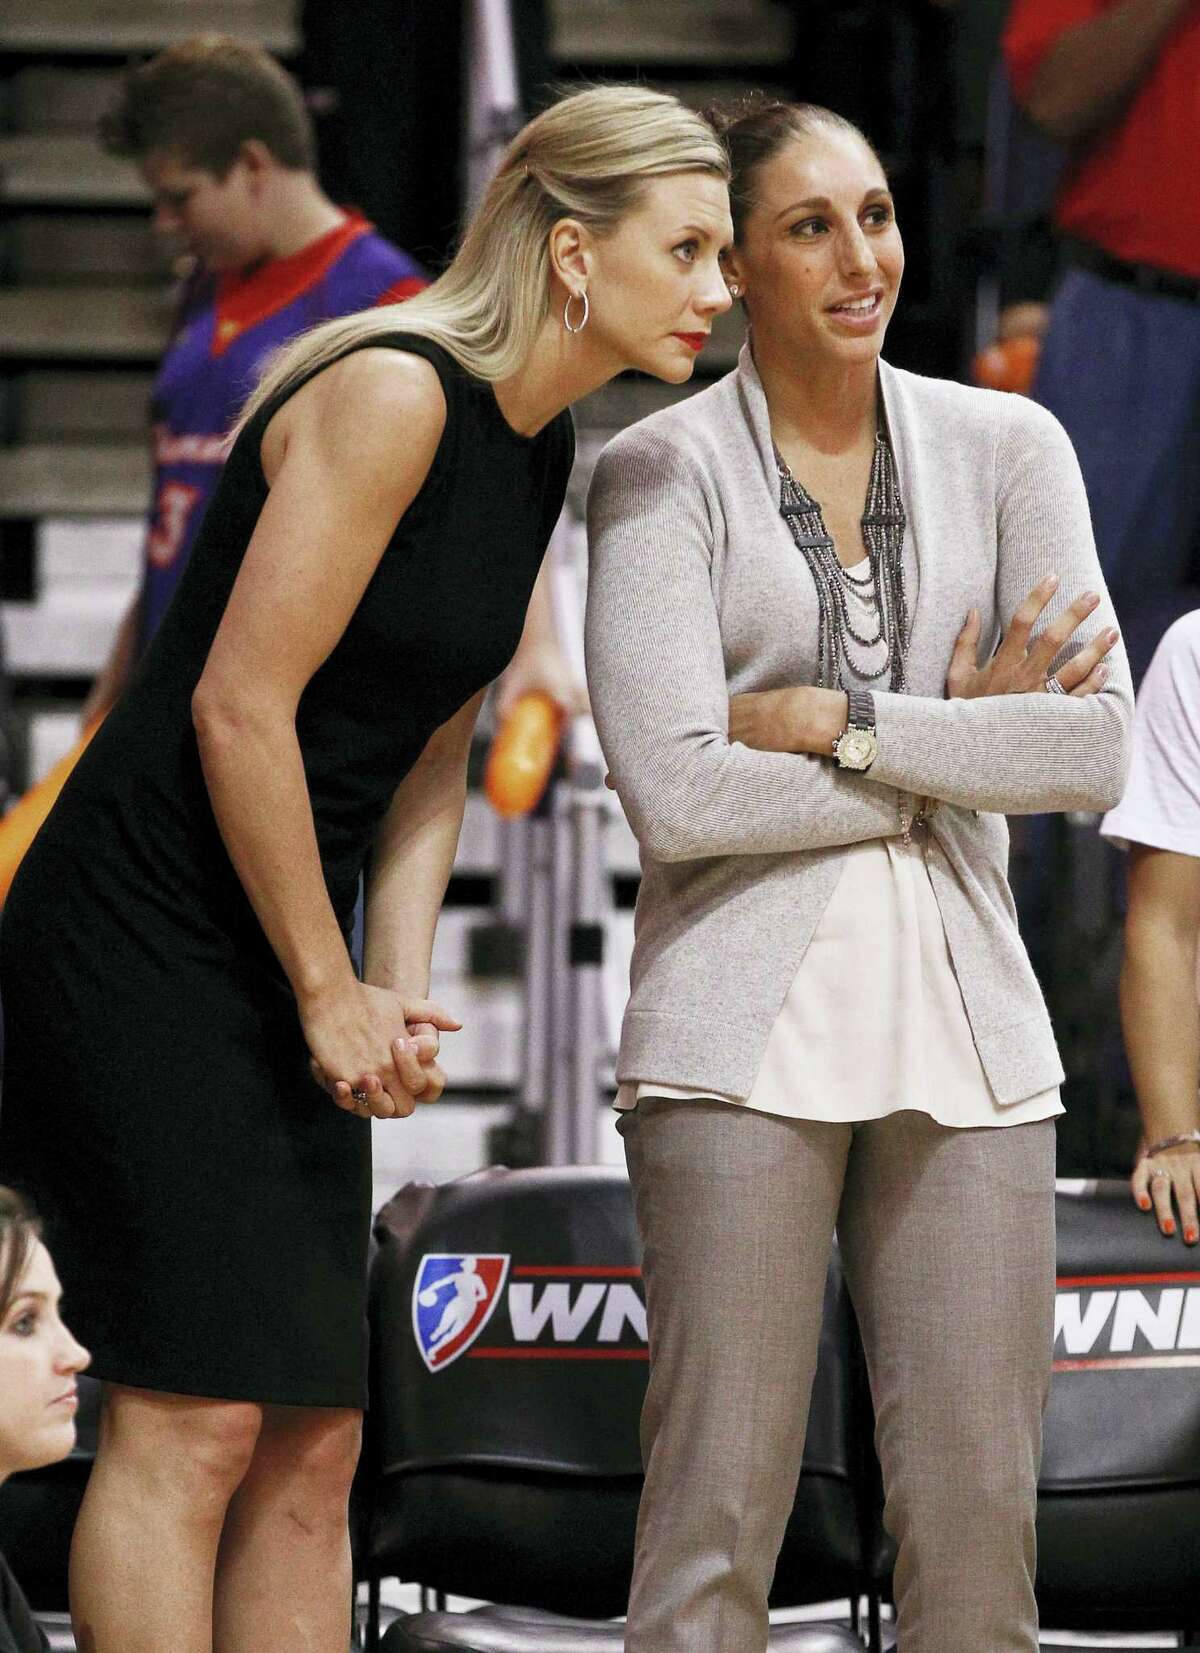 In this Sept. 12, 2012 photo, injured Phoenix Mercury players Penny Taylor, left, of Australia, and Diana Taurasi stand at the team bench during the first half of a WNBA basketball game against the Connecticut Sun, in Phoenix. Diana Taurasi has married former Phoenix Mercury teammate Penny Taylor, then played in the team’s season opener less than 24 hours later. The 34-year-old Taurasi has played for the Mercury since 2004, helping the team win three titles. She also helped the U.S. win four consecutive Olympic gold medals. The couple married May 13, 2017.